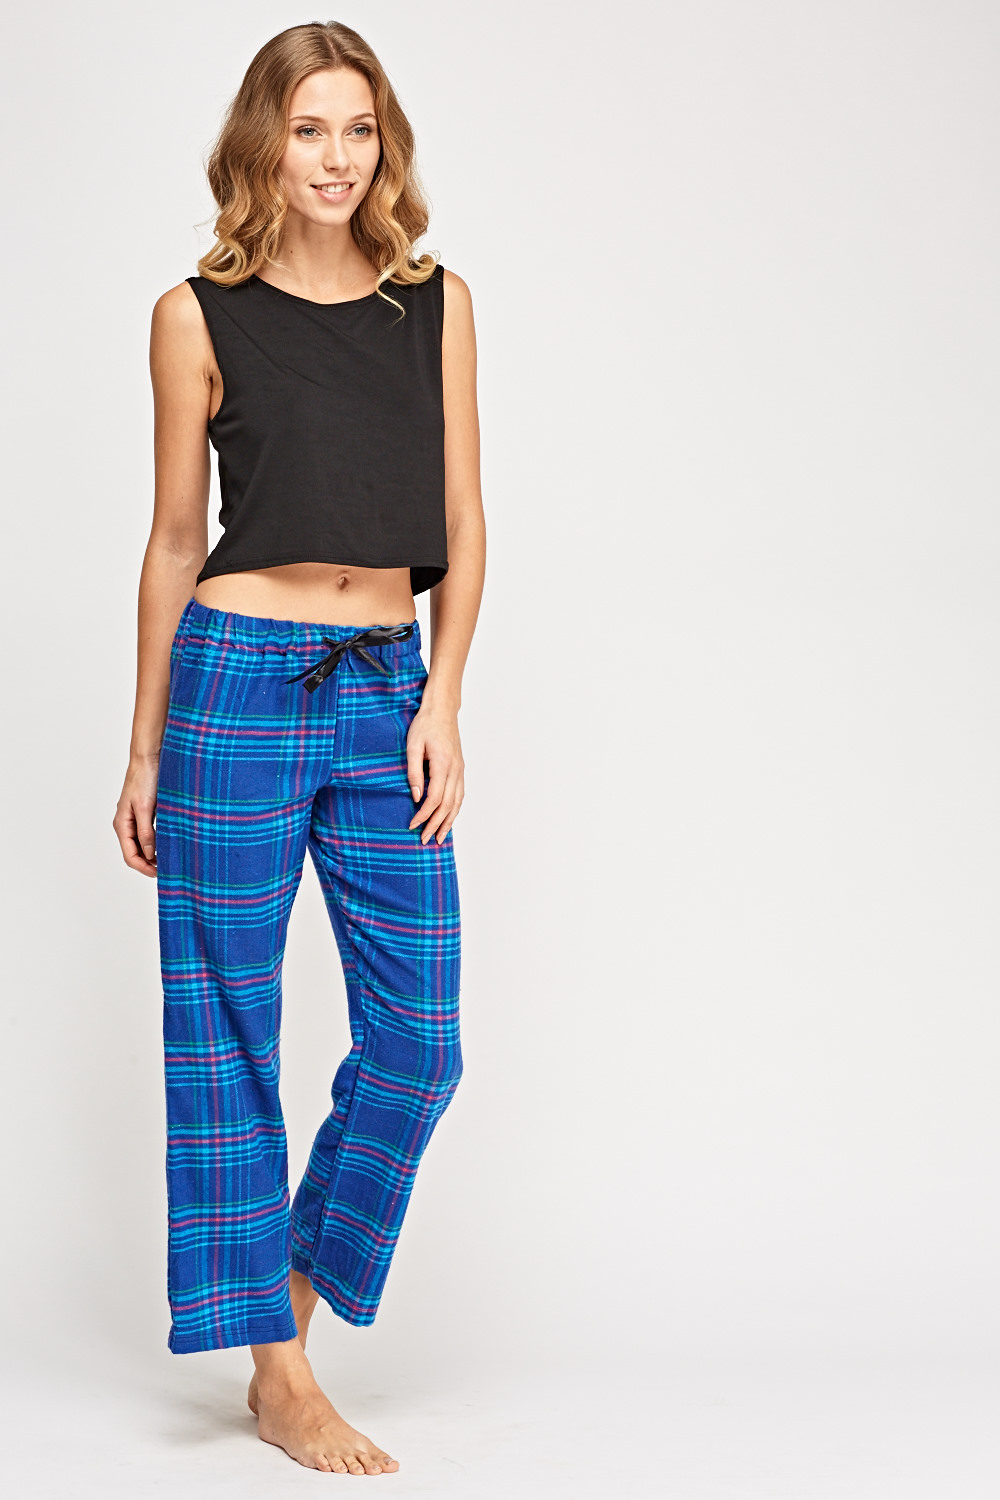 Checked Blue Pyjama Trousers - Just $6